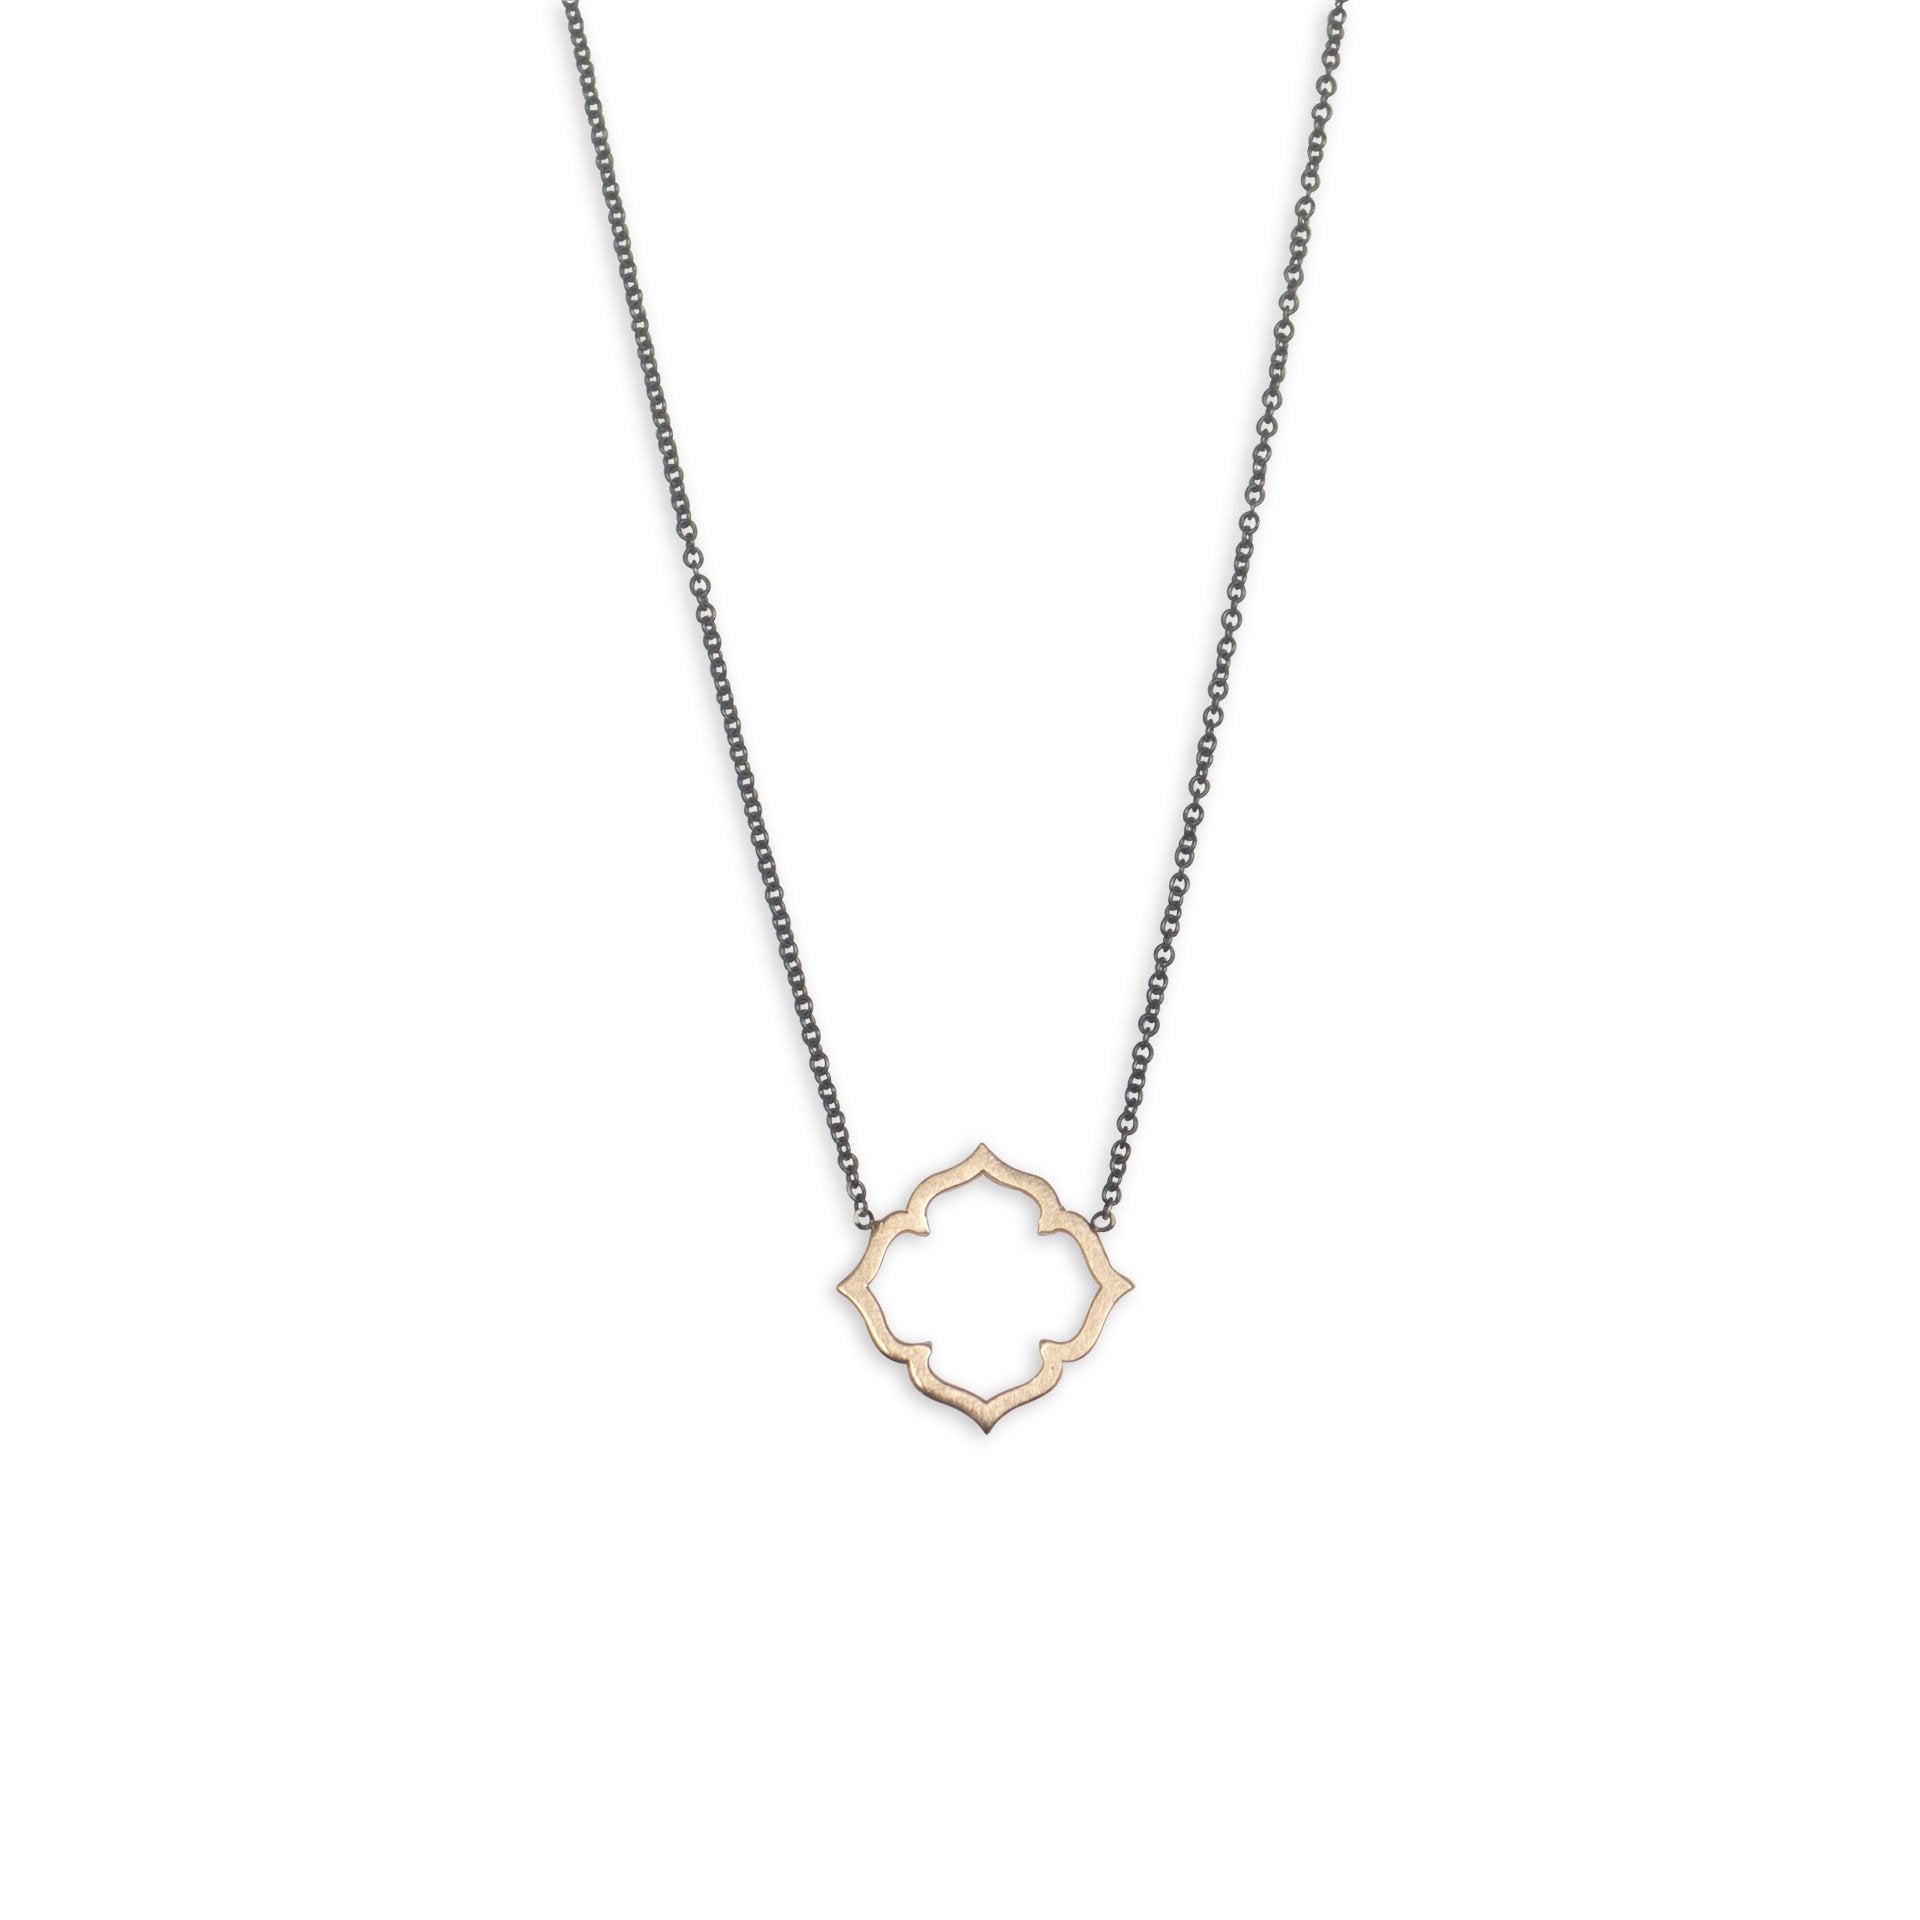 14k yellow gold on an oxidized chain clover necklace